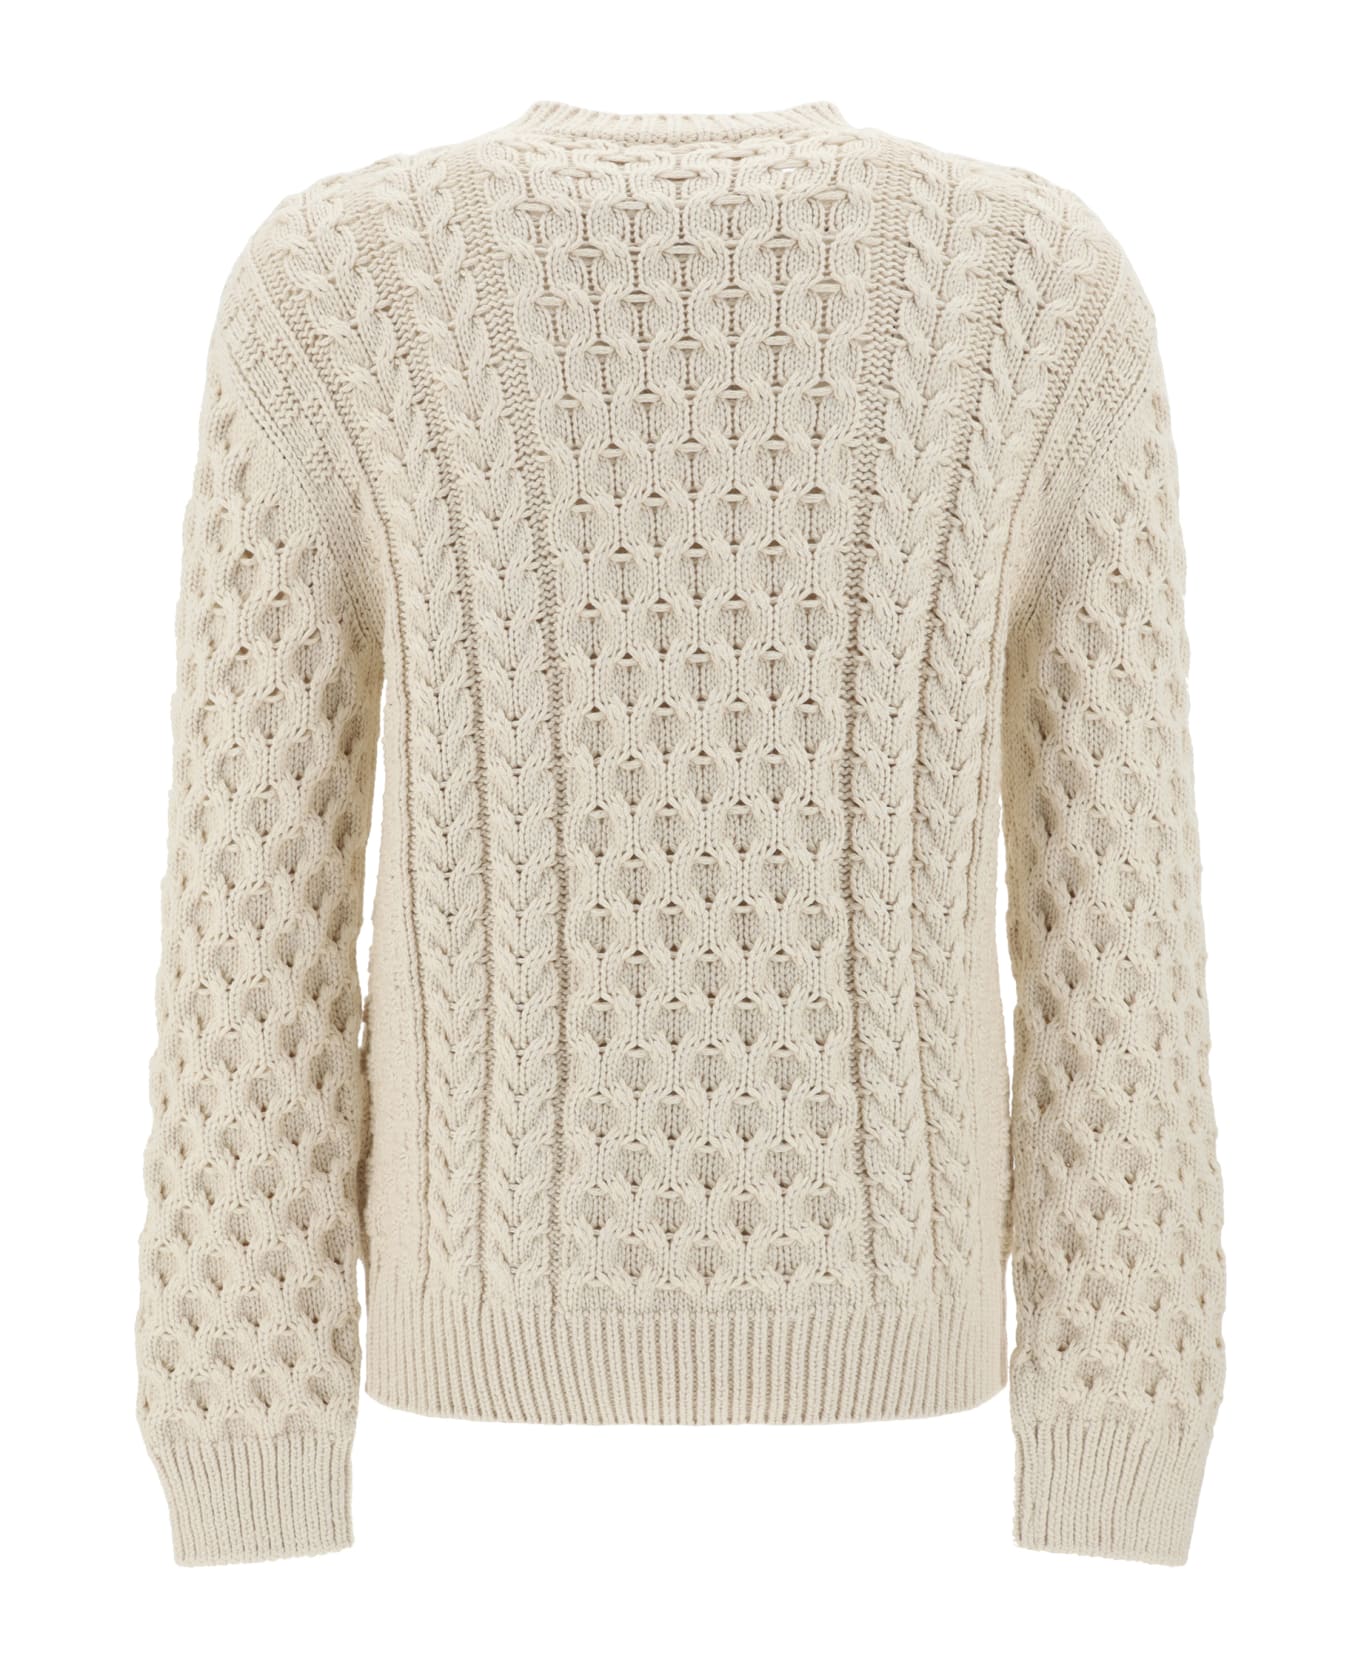 Givenchy 4g Knit Sweater - Beige